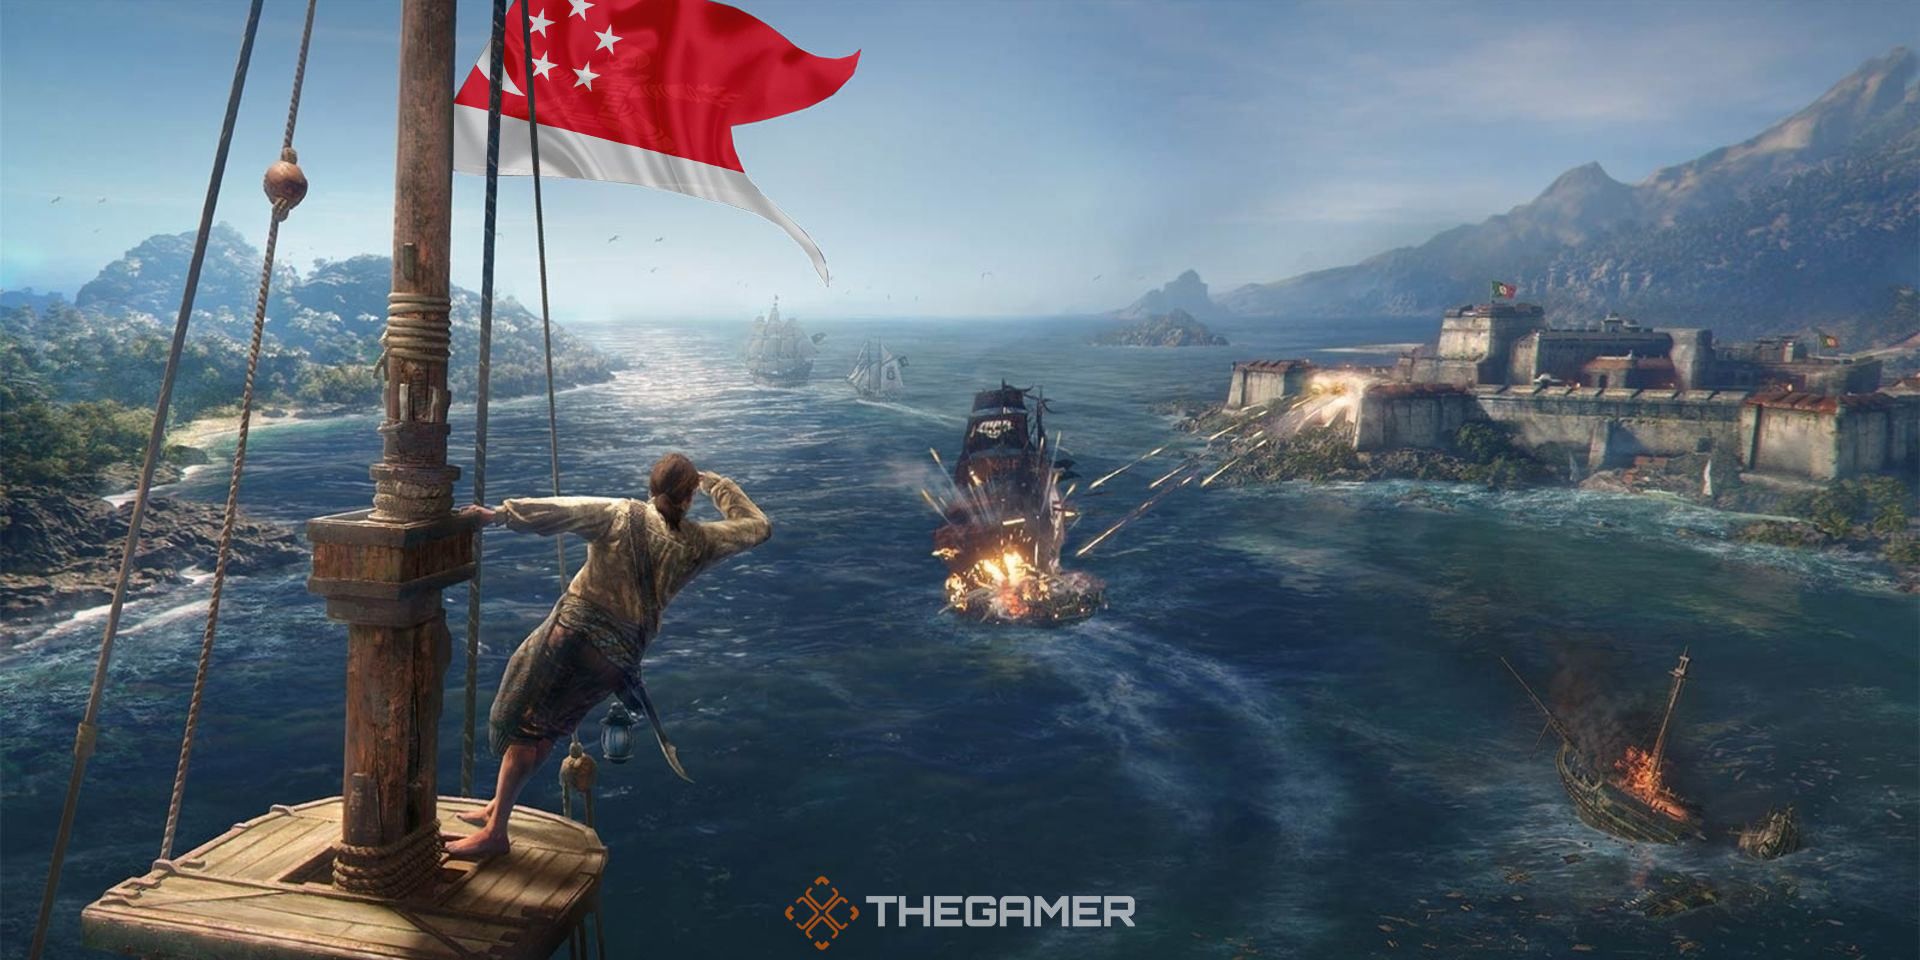 A pirate on a ship mast with a singapore flag watches as a ship gets attacked by a fort